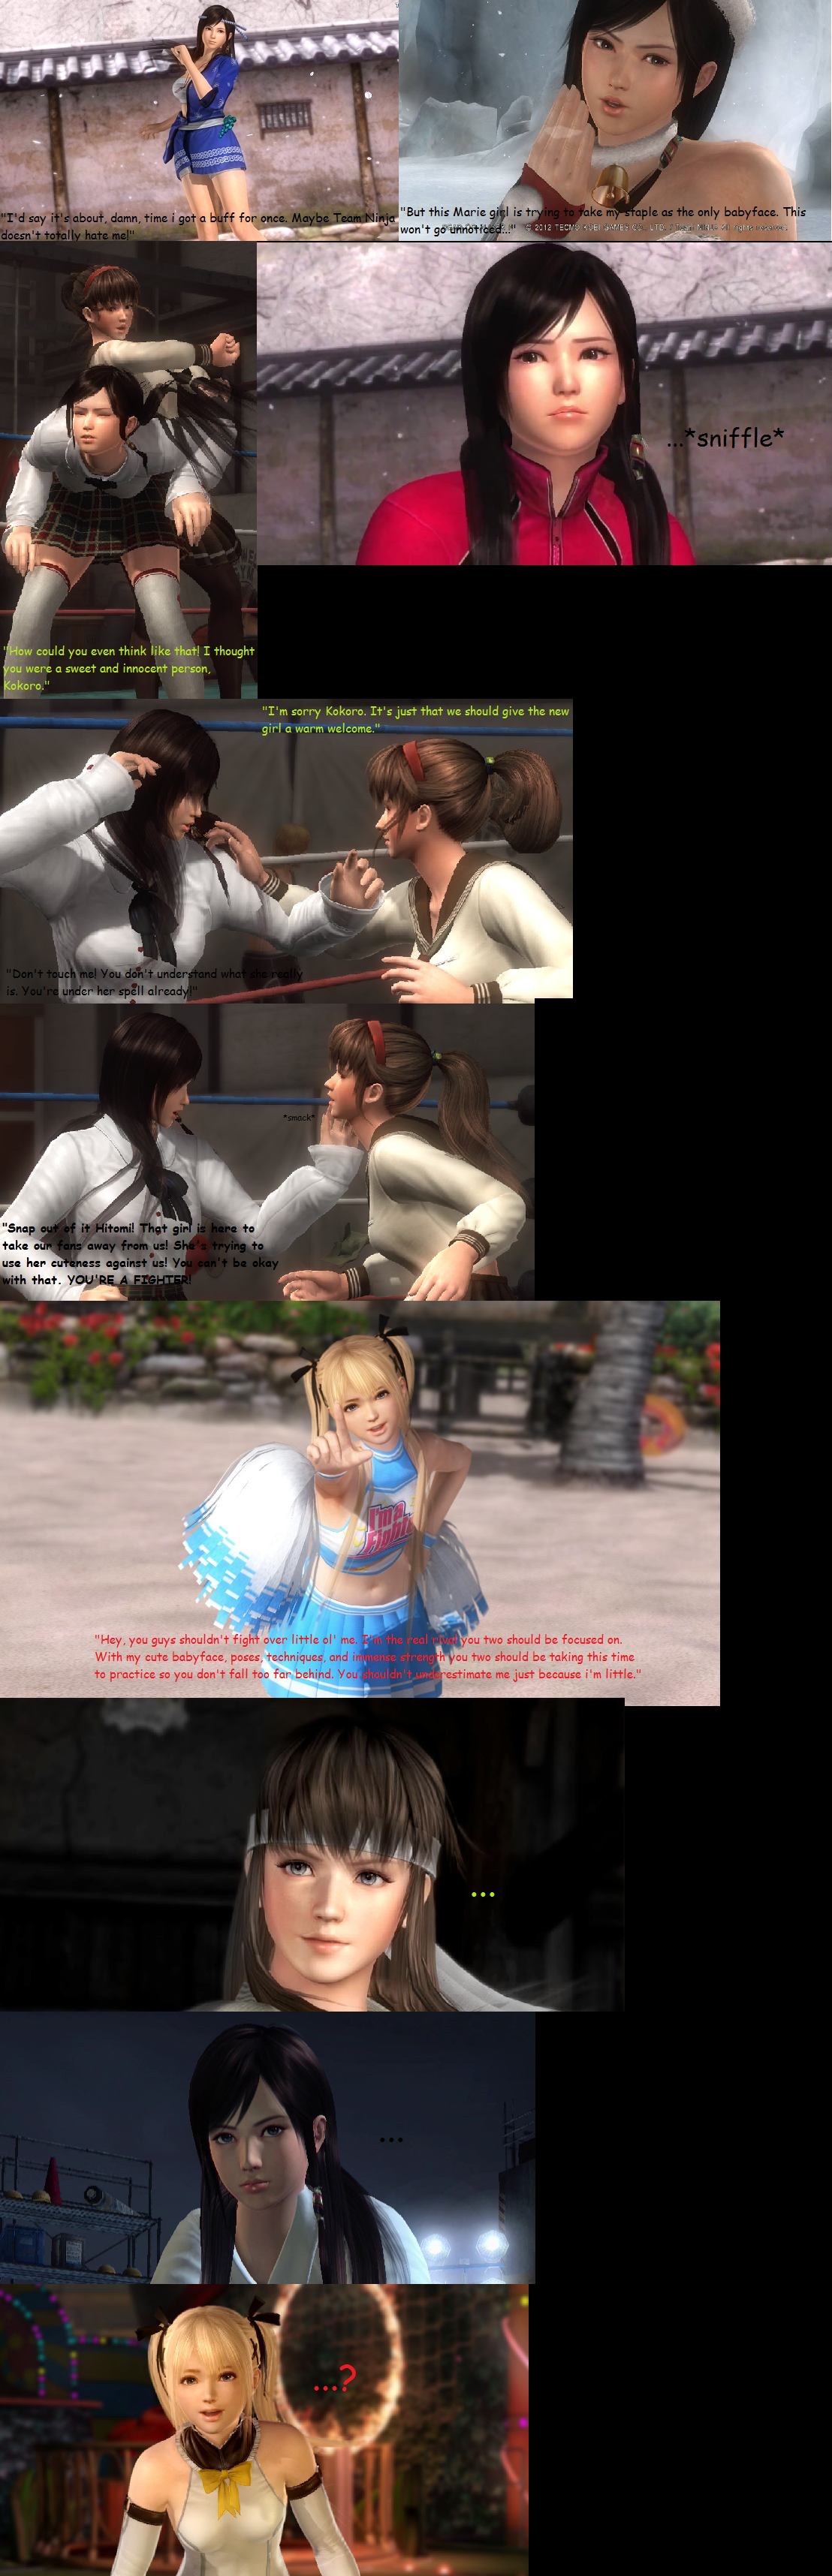 doa_gag_by_0vincentrayne0-d7bwtox.png